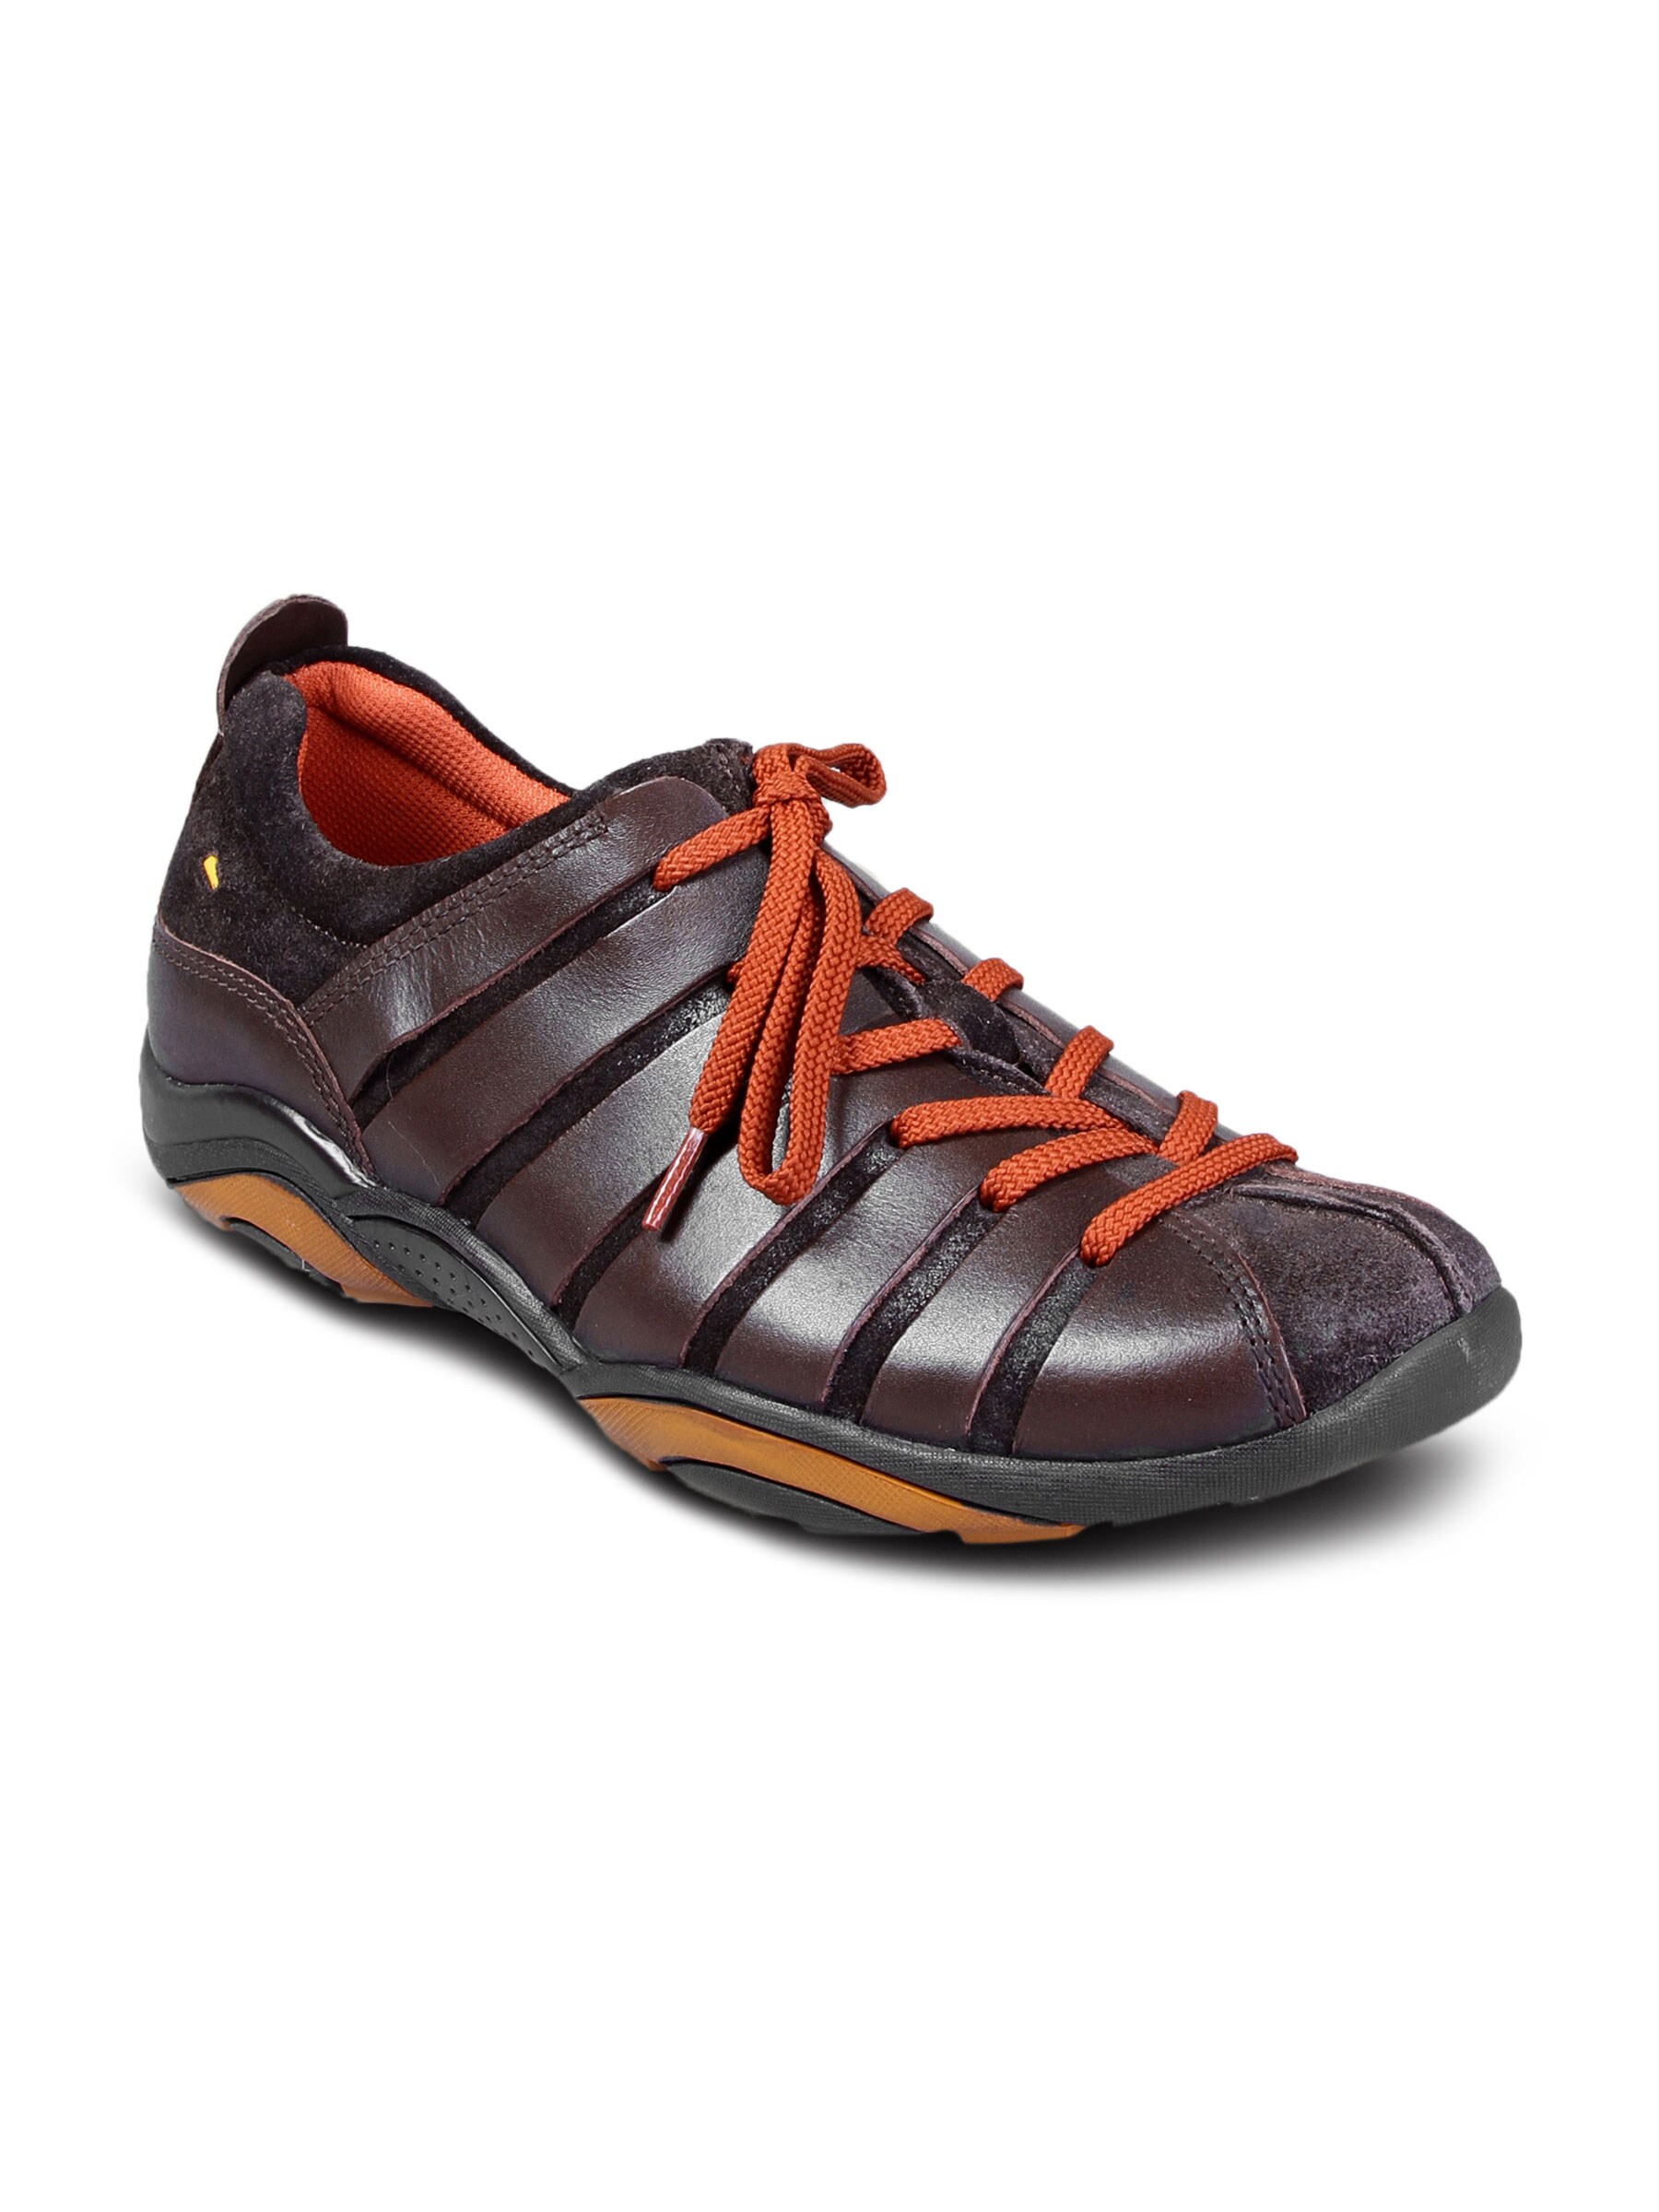 iD Men's Casual Leather Brown Funky Shoe